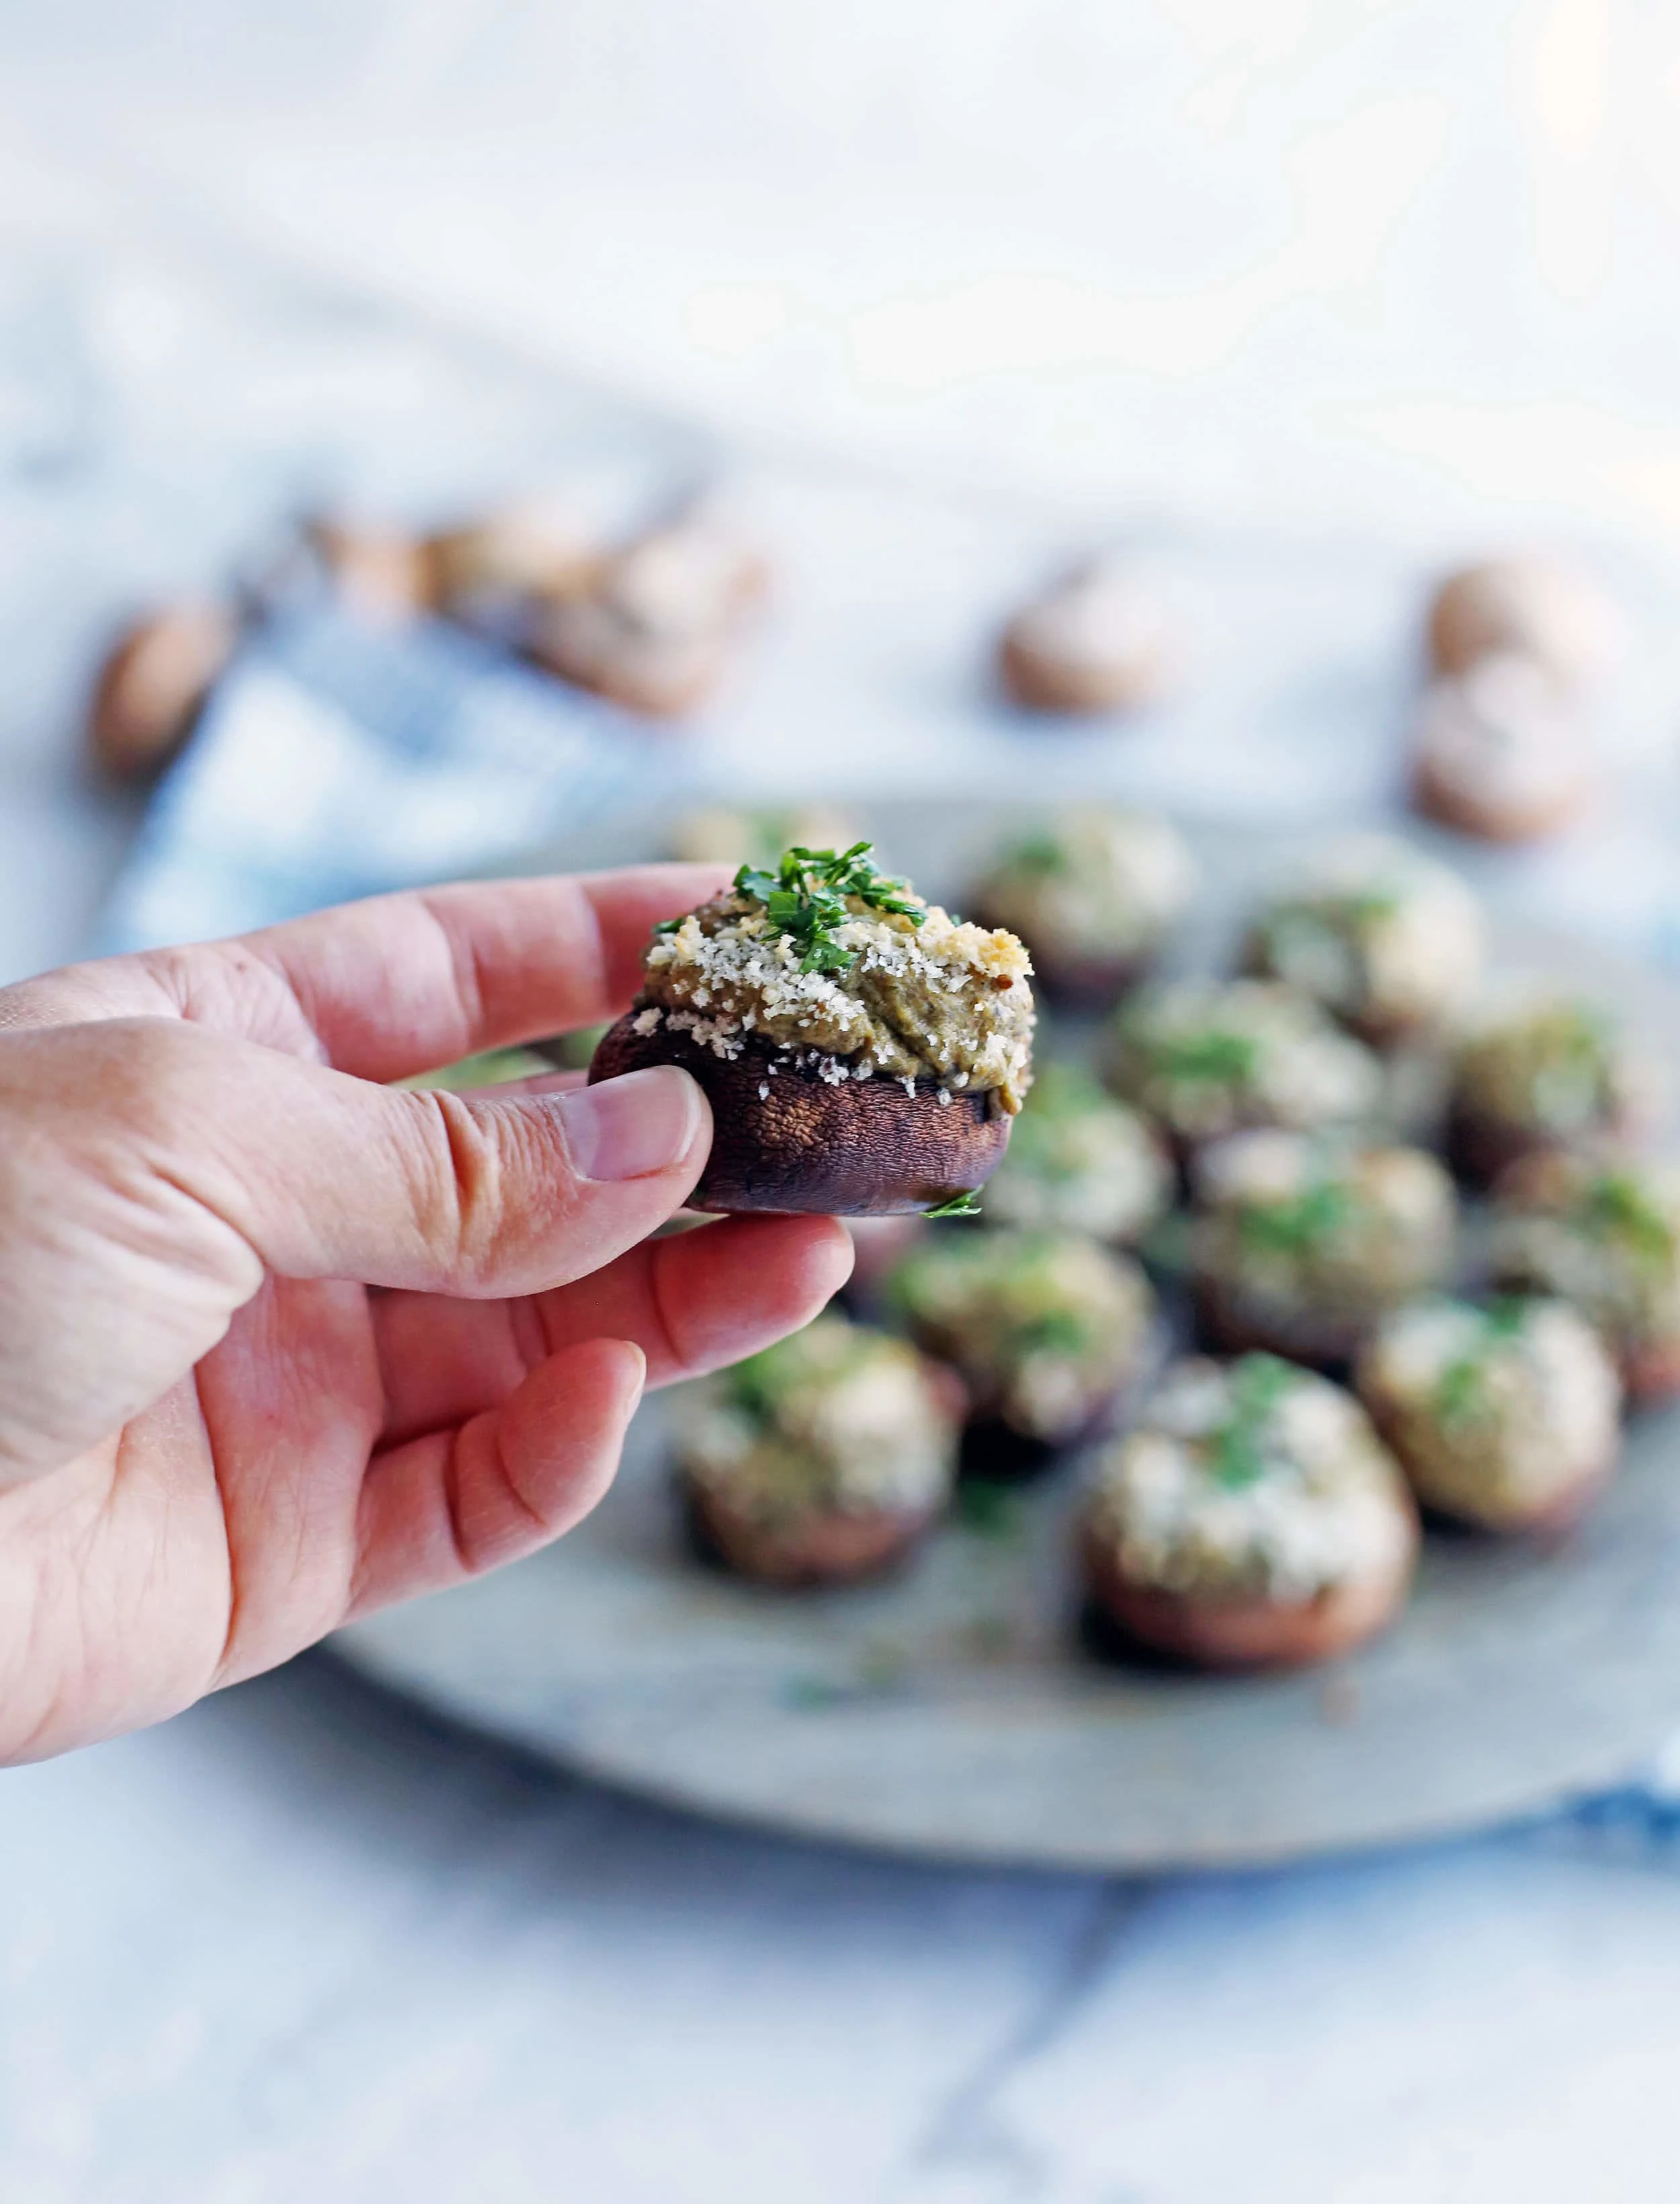 A hand holding a single baked stuffed mushroom on top of a platter containing more stuffed mushrooms.